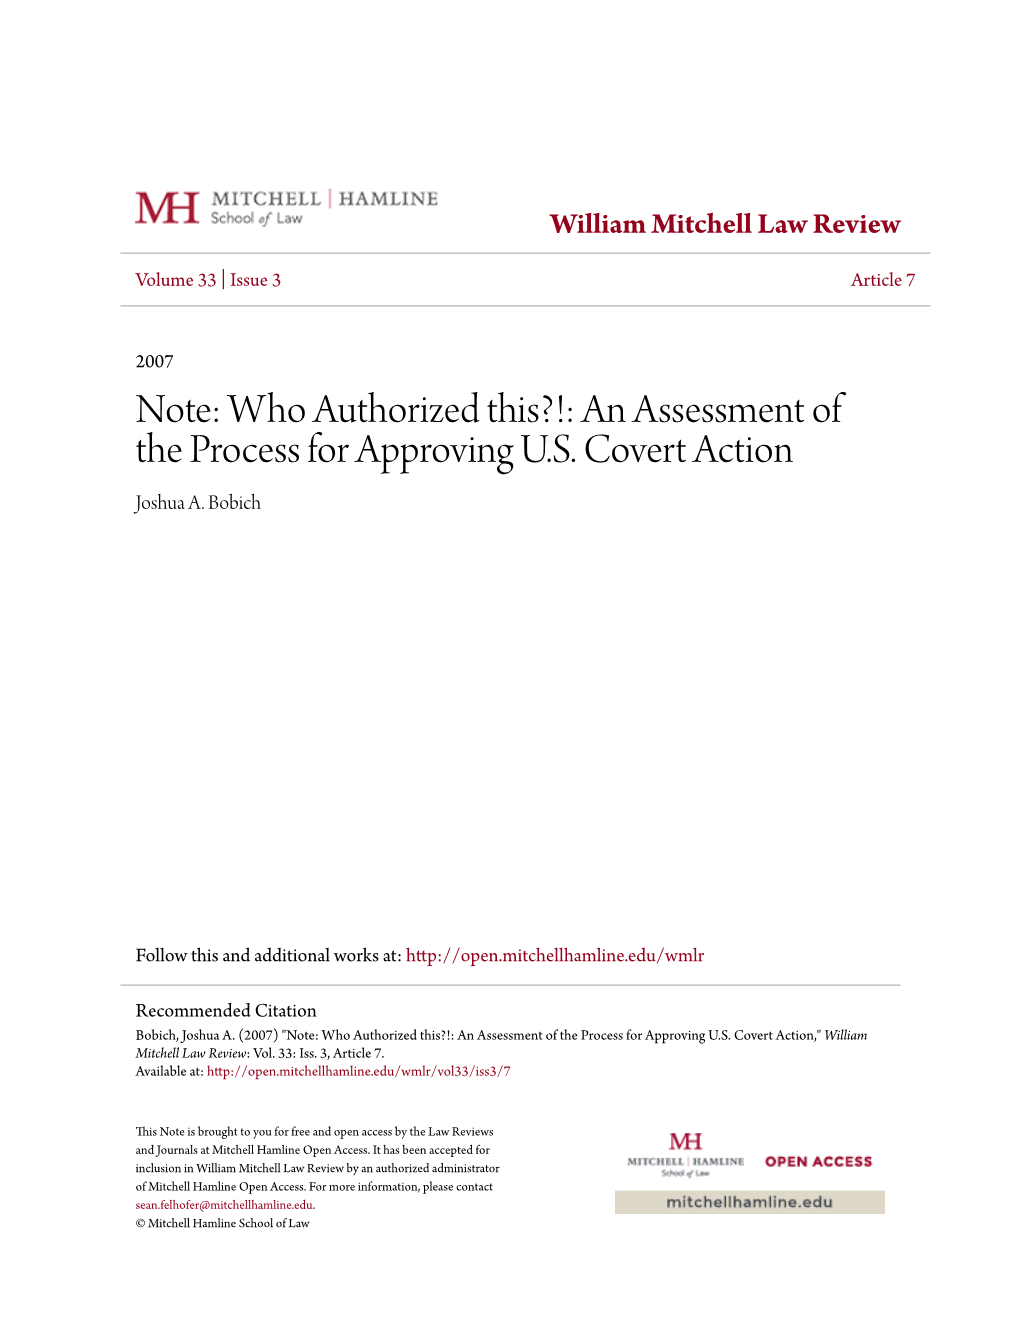 Who Authorized This?!: an Assessment of the Process for Approving US Covert Action